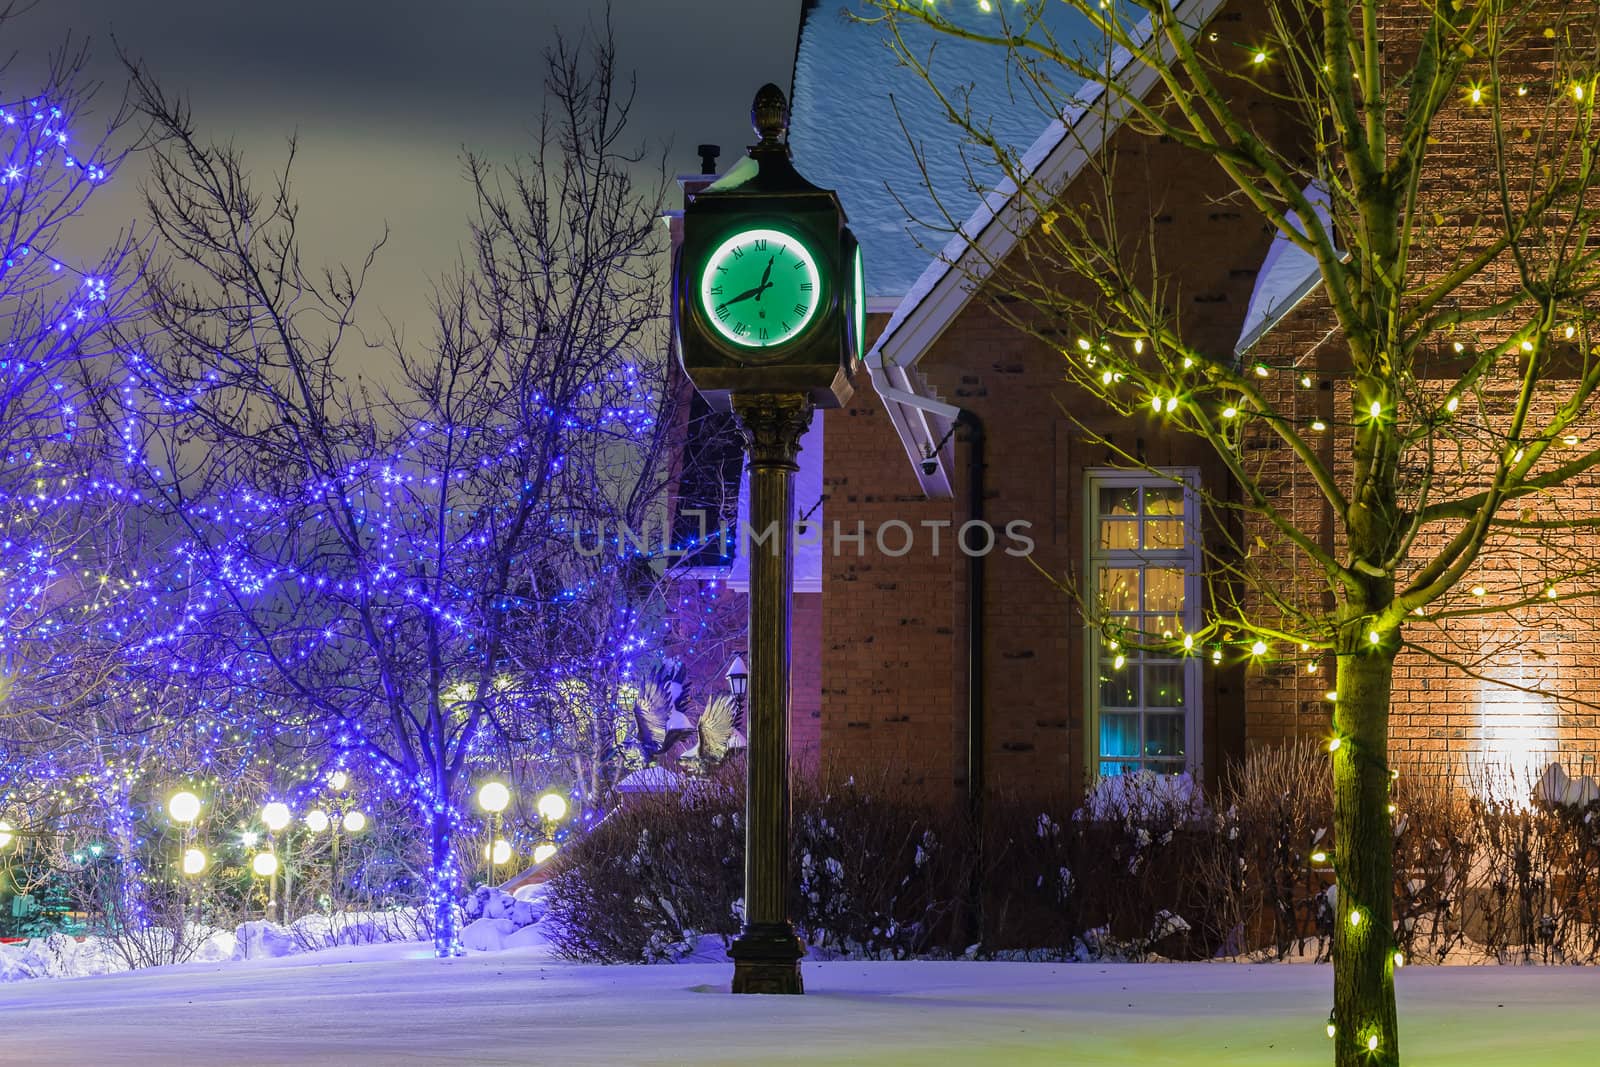  A beautiful old style green clock by petkolophoto